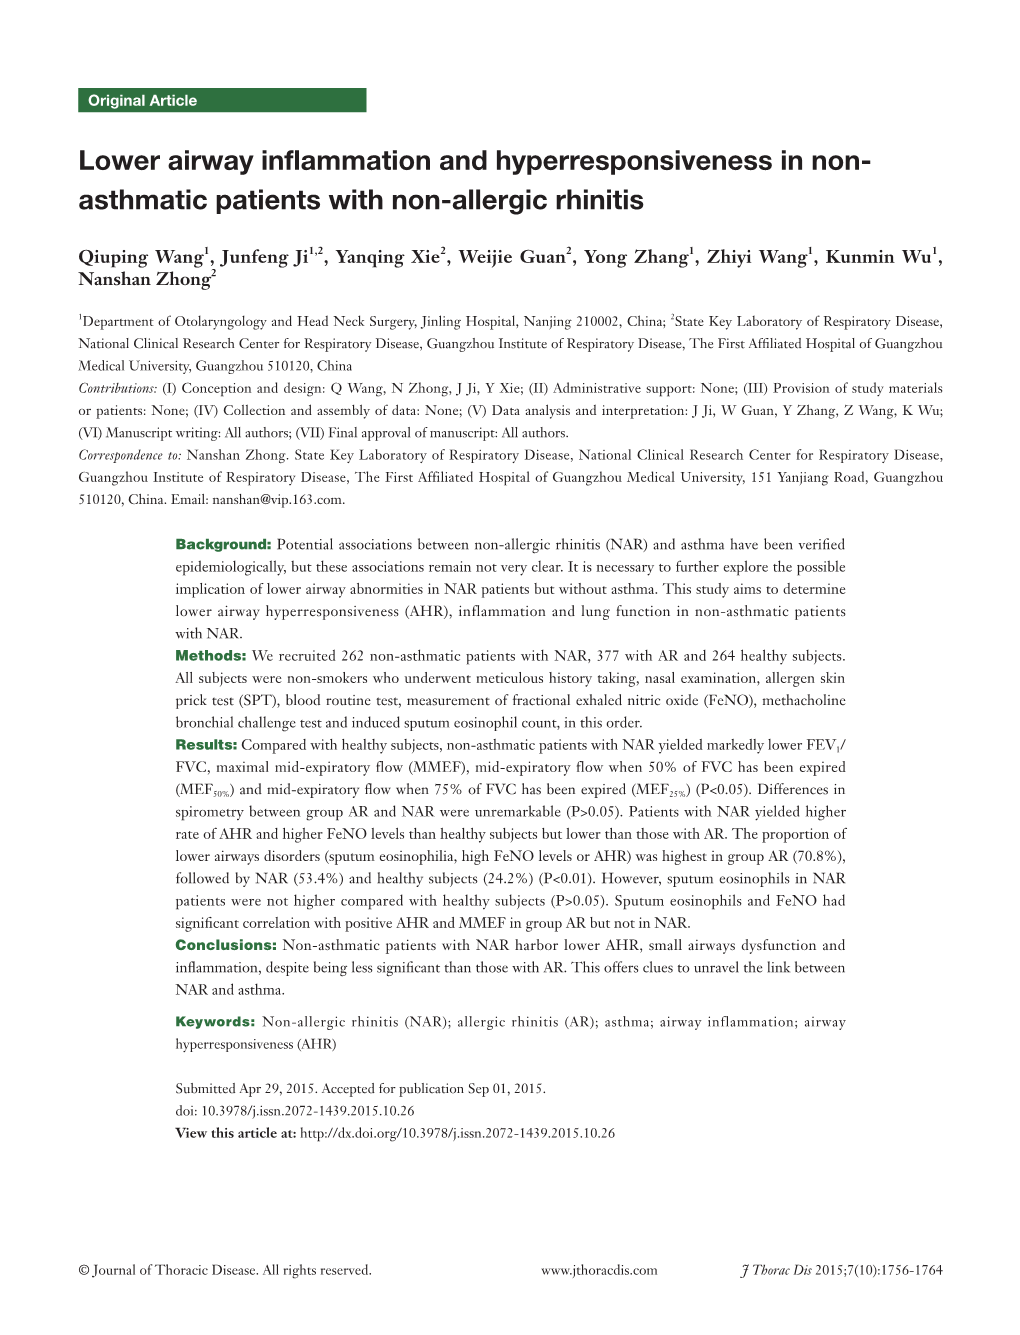 Asthmatic Patients with Non-Allergic Rhinitis